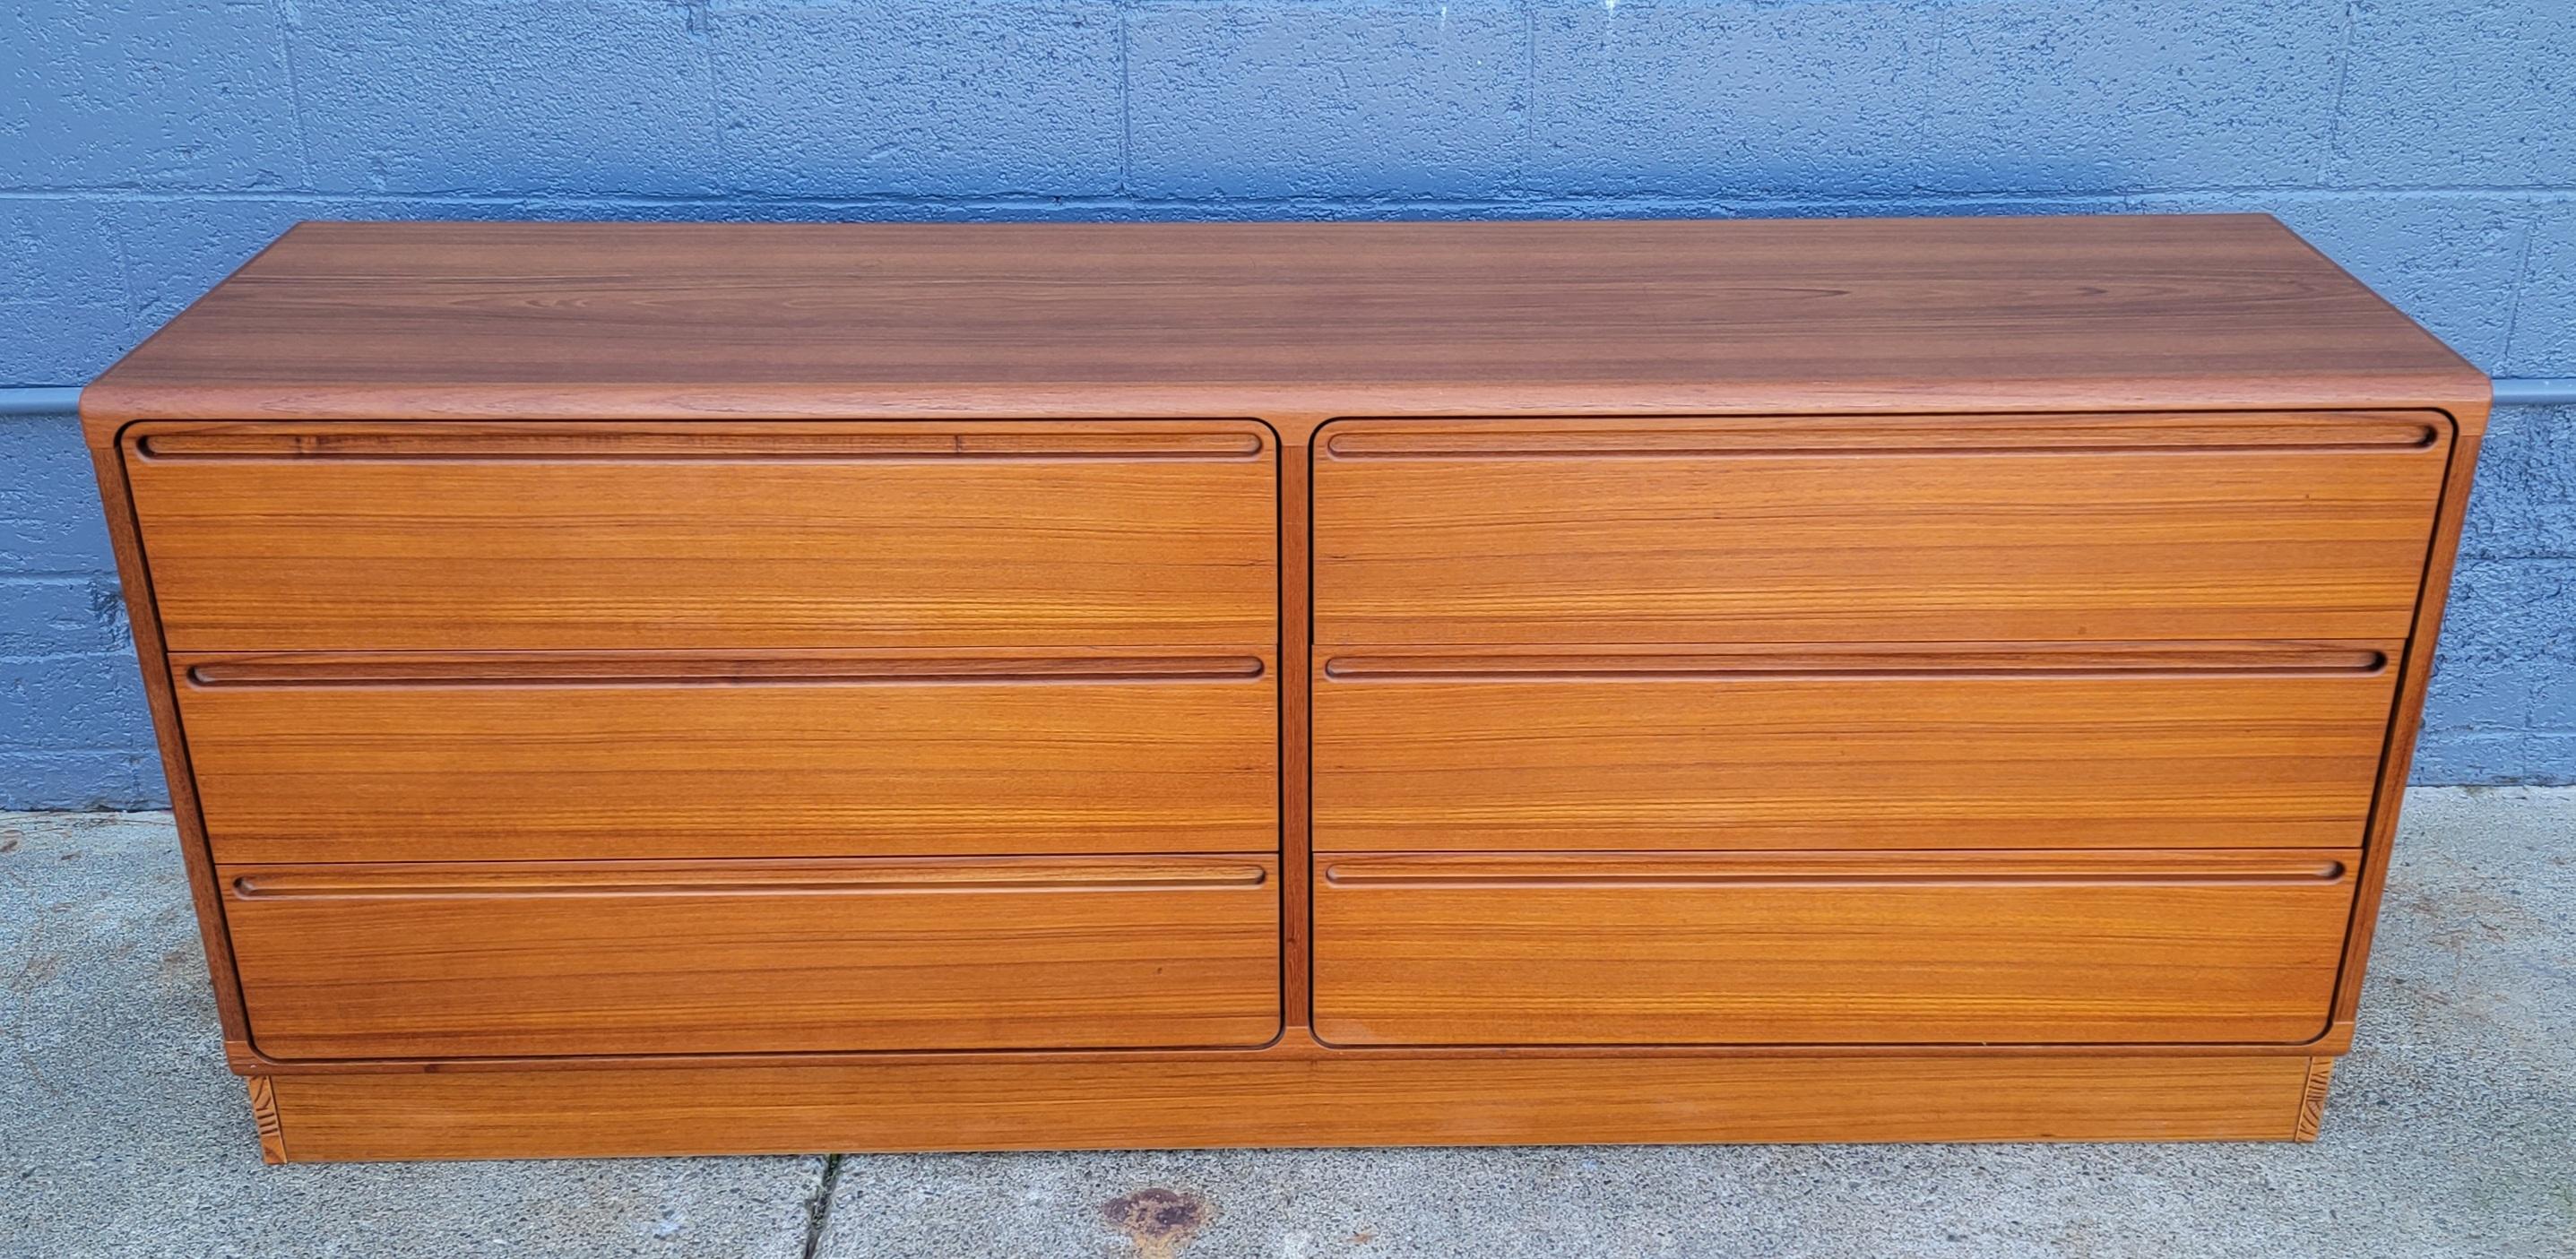 Fine teak Danish Modern dresser designed by Nils Jonsson for Torring Mobelfabrik, Denmark. Excellent original condition with beautiful glow to finish. Six large drawers on metal glides operate very easily. Retains Torring labels.